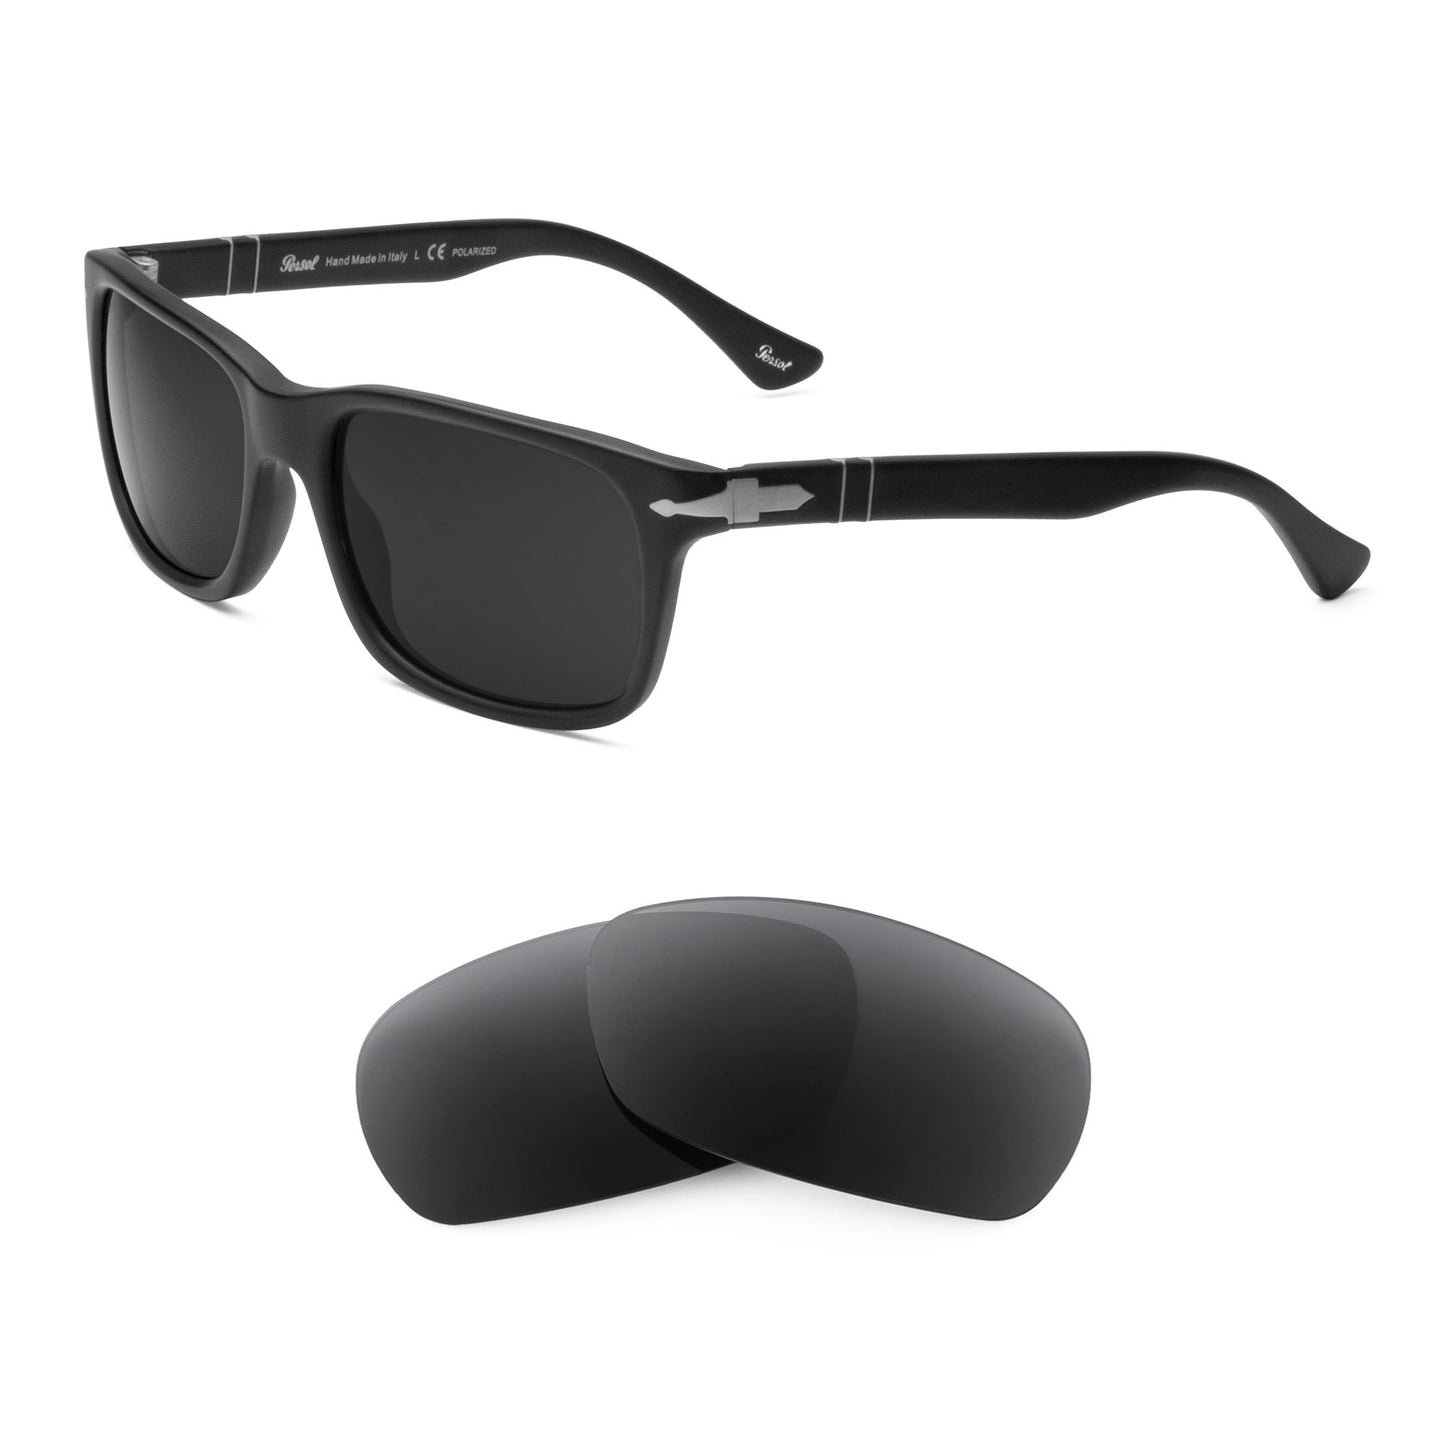 Persol PO3048S sunglasses with replacement lenses